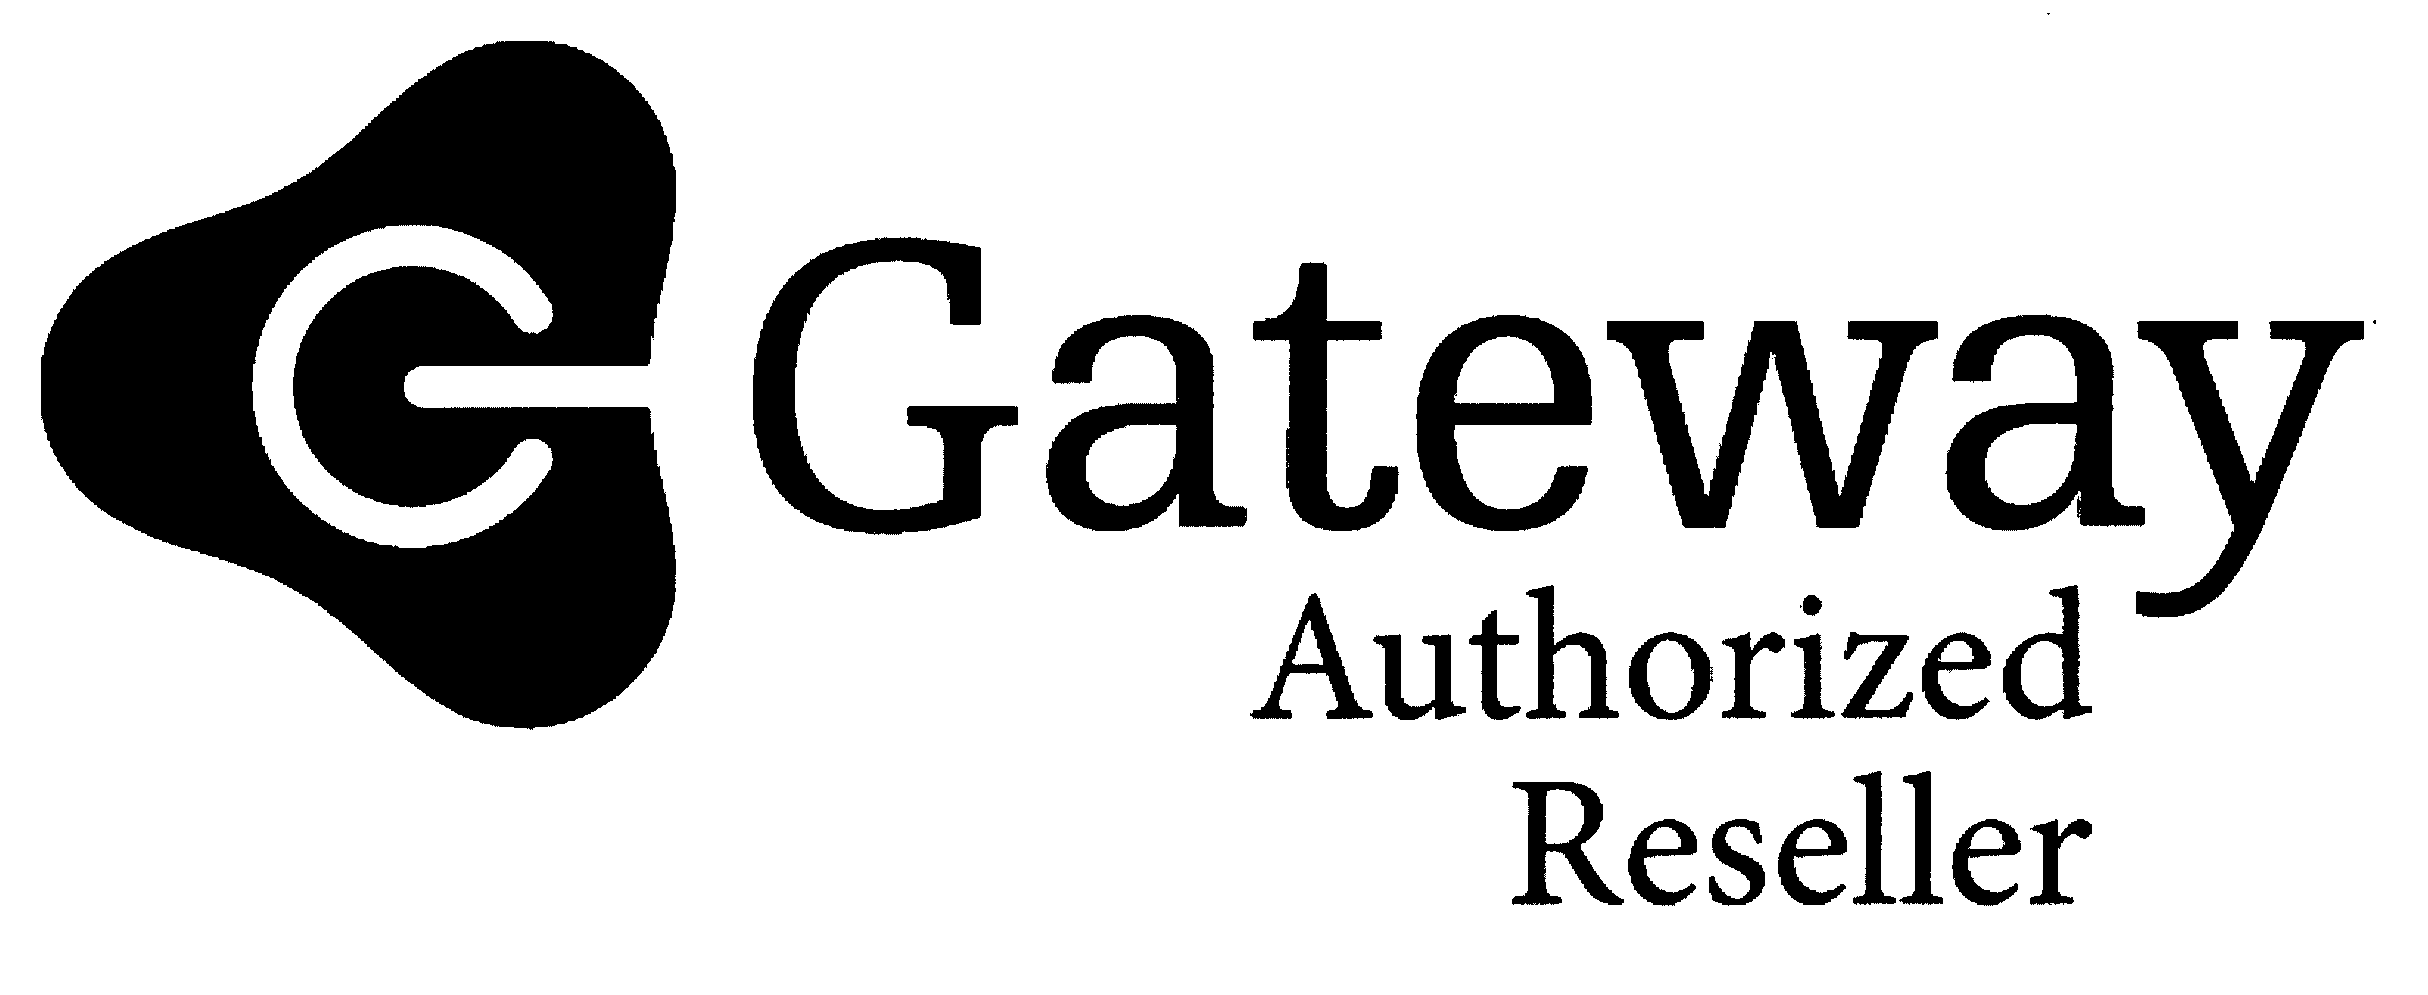  G GATEWAY AUTHORIZED RESELLER